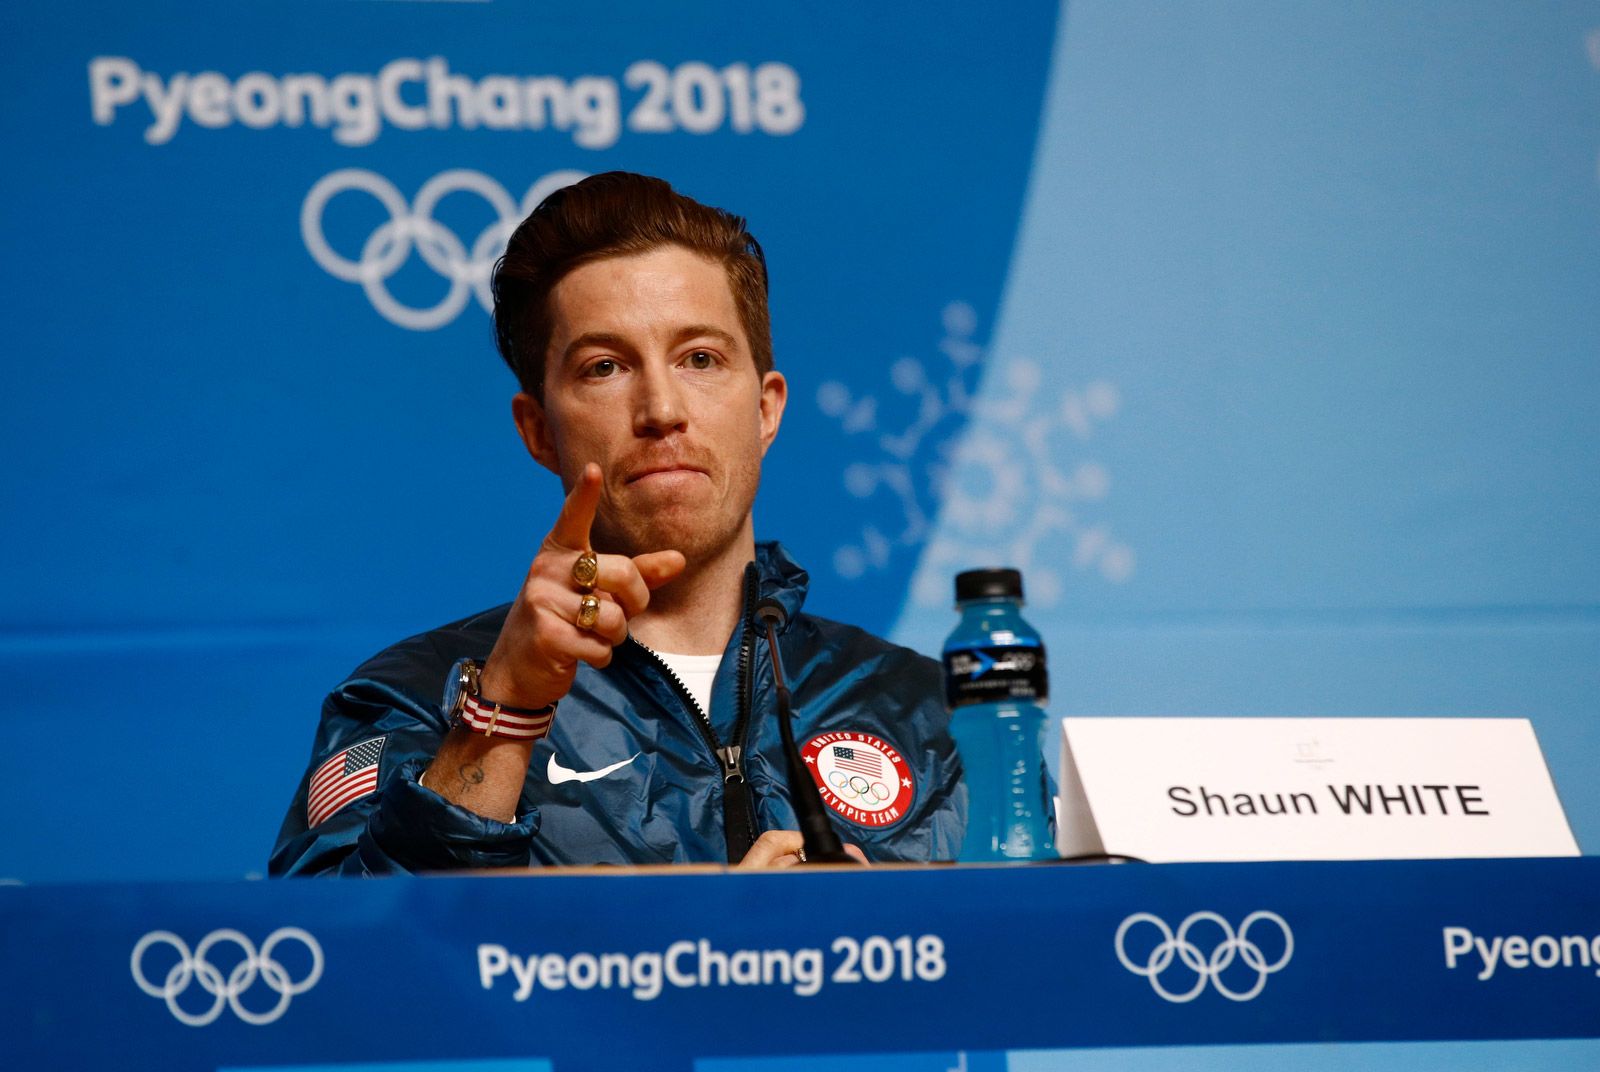 California: Shaun White to lead Northstar's 40th-year celebration - Los  Angeles Times